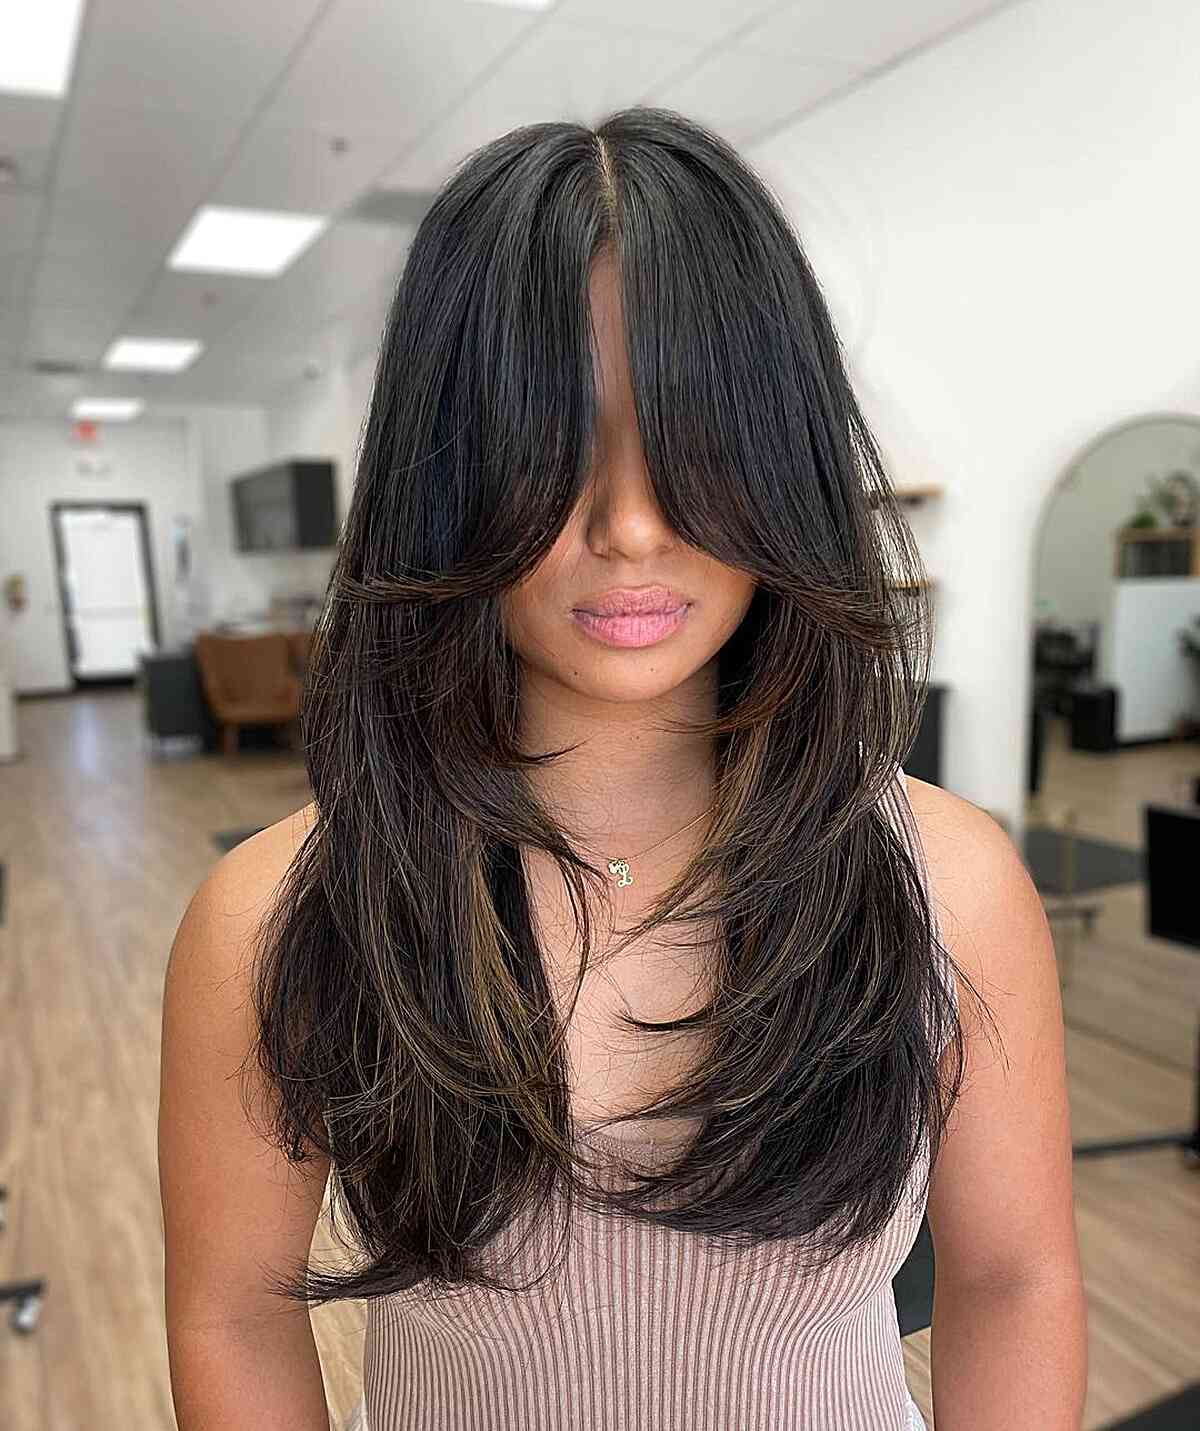 Center Part Long Feathered Cut with Long Curtain Bangs